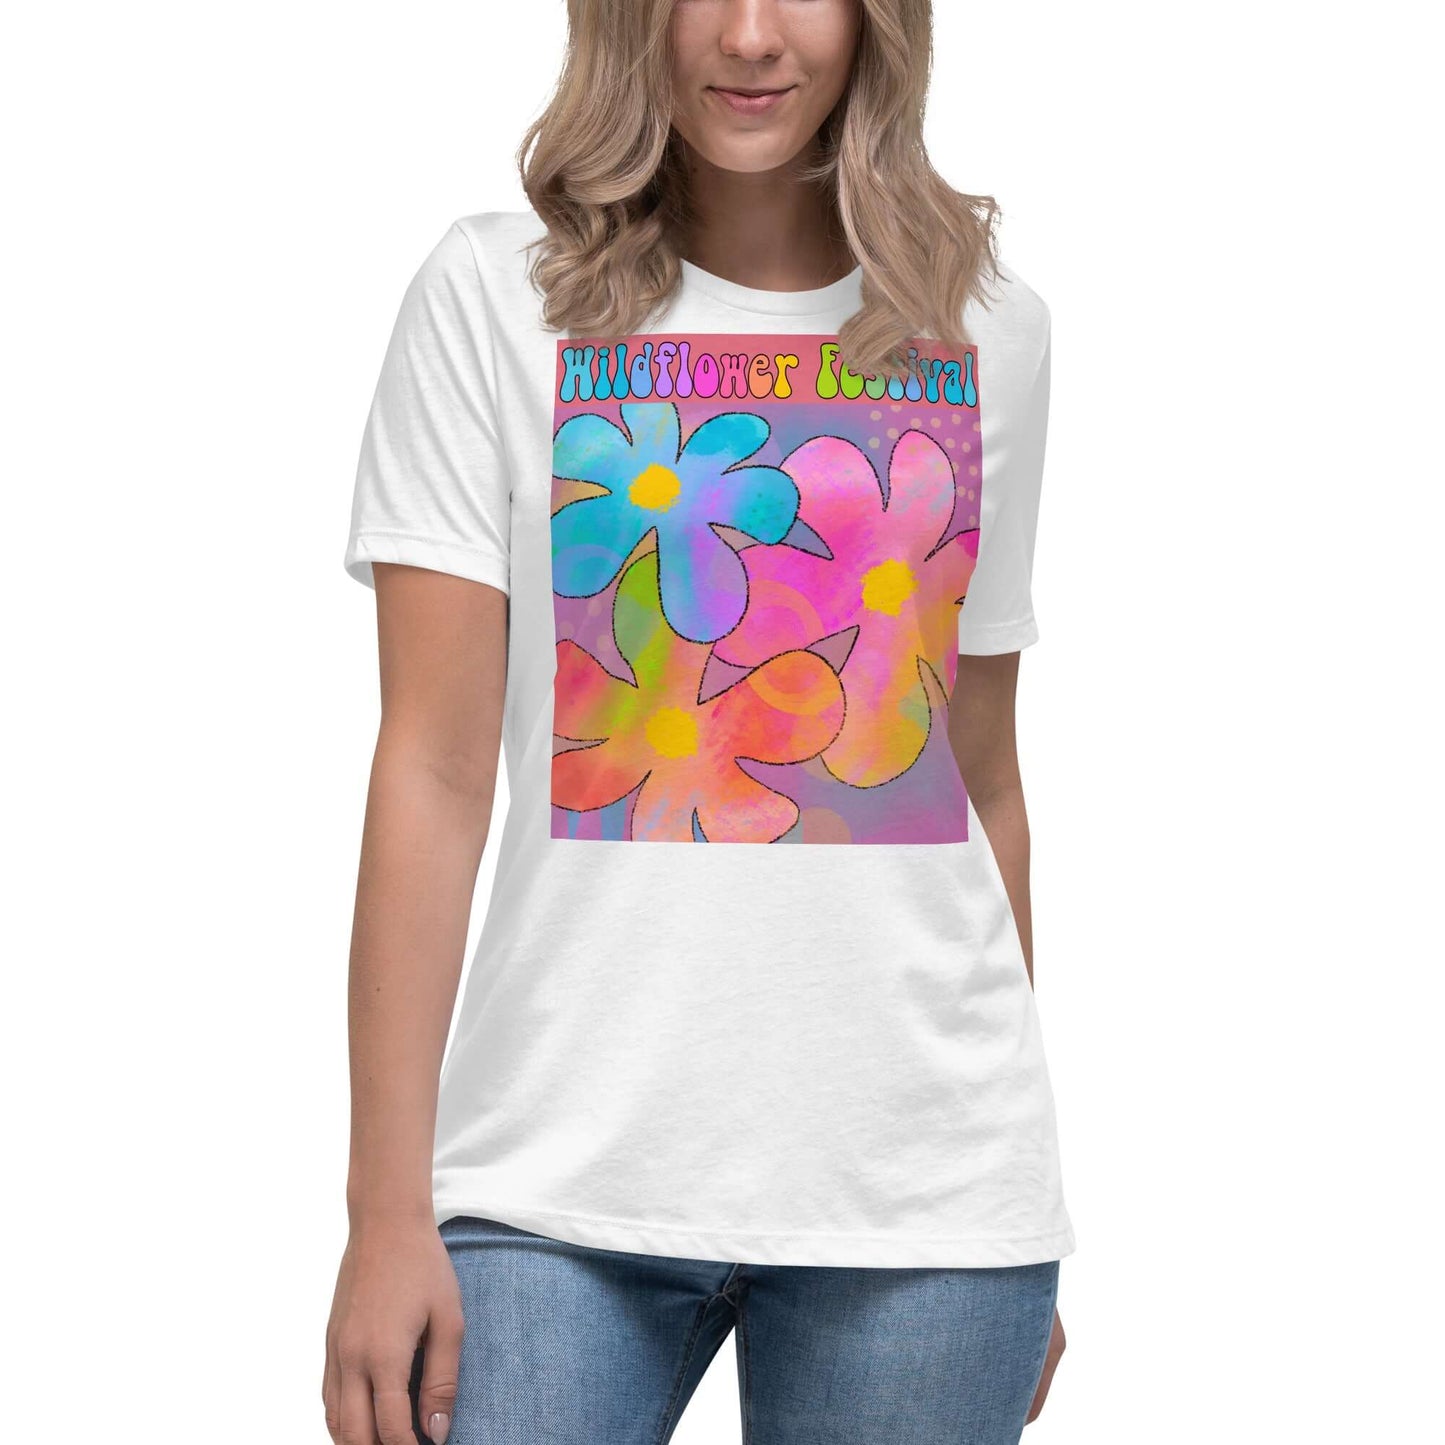 Big Colorful Hippie 1960s Psychedelic Flowers with Text “Wildflower Festival” Women’s Short Sleeve Tee in White